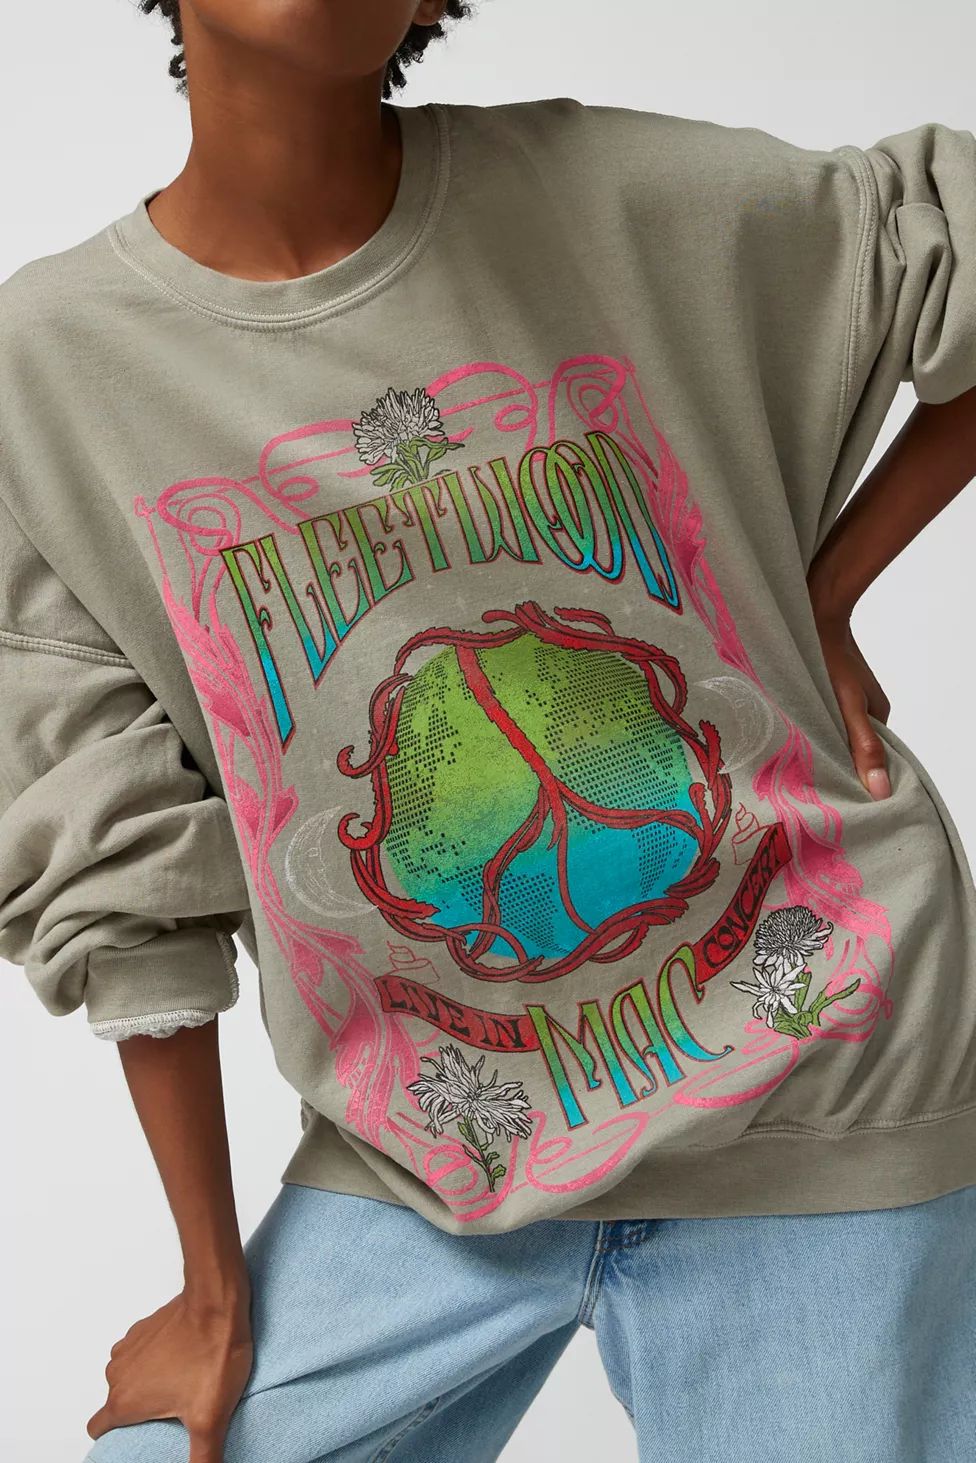 Fleetwood Mac Pullover Sweatshirt | Urban Outfitters (US and RoW)